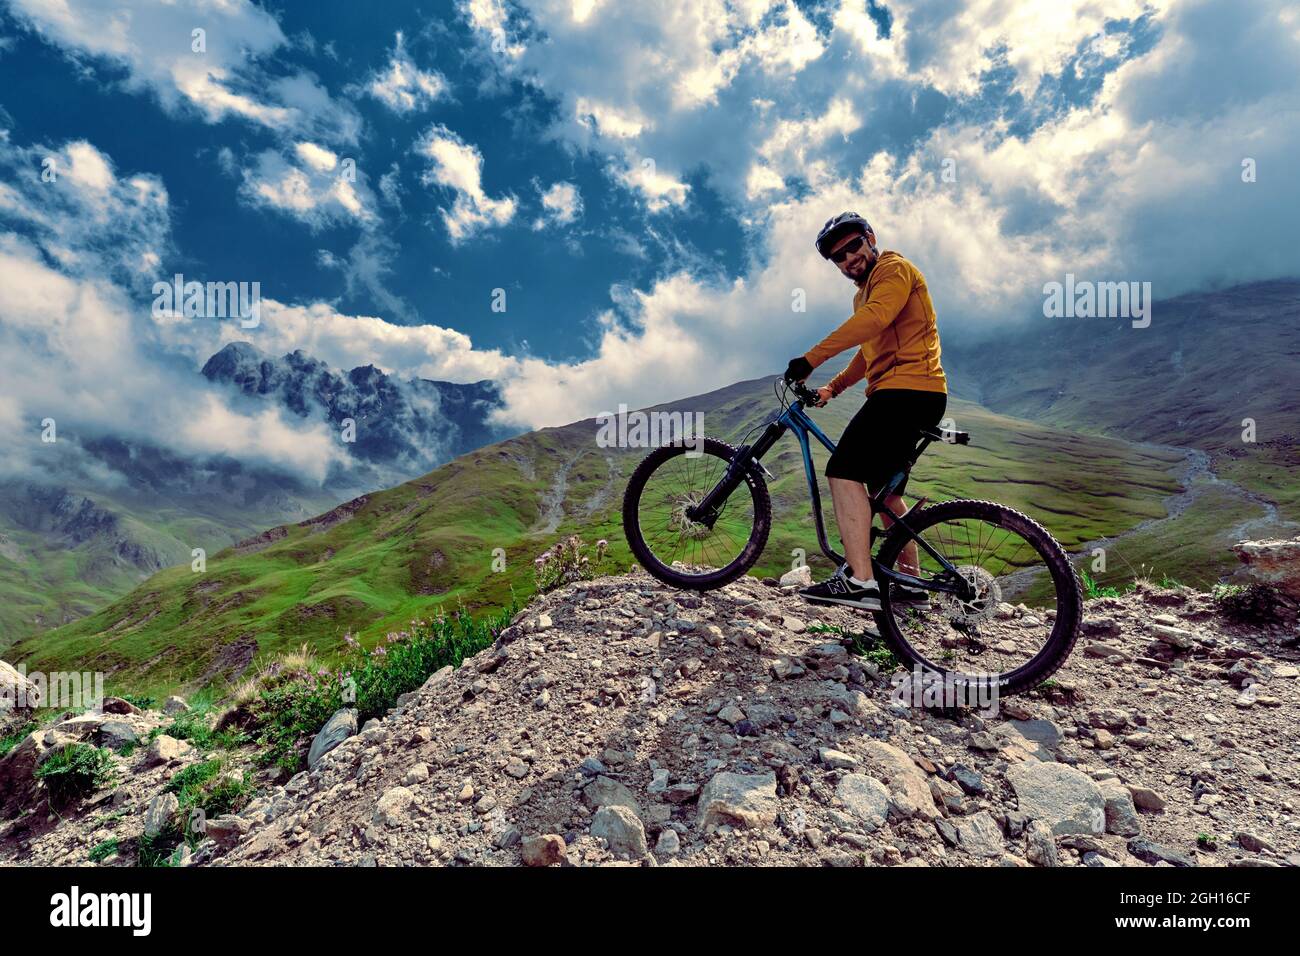 Elbrus, Kabardino-Balkaria, Russia - August 2017: Mountain biking in Elbrus. Cyclist on the top of a hill and enjoying view of the mountains. MTB bicy Stock Photo